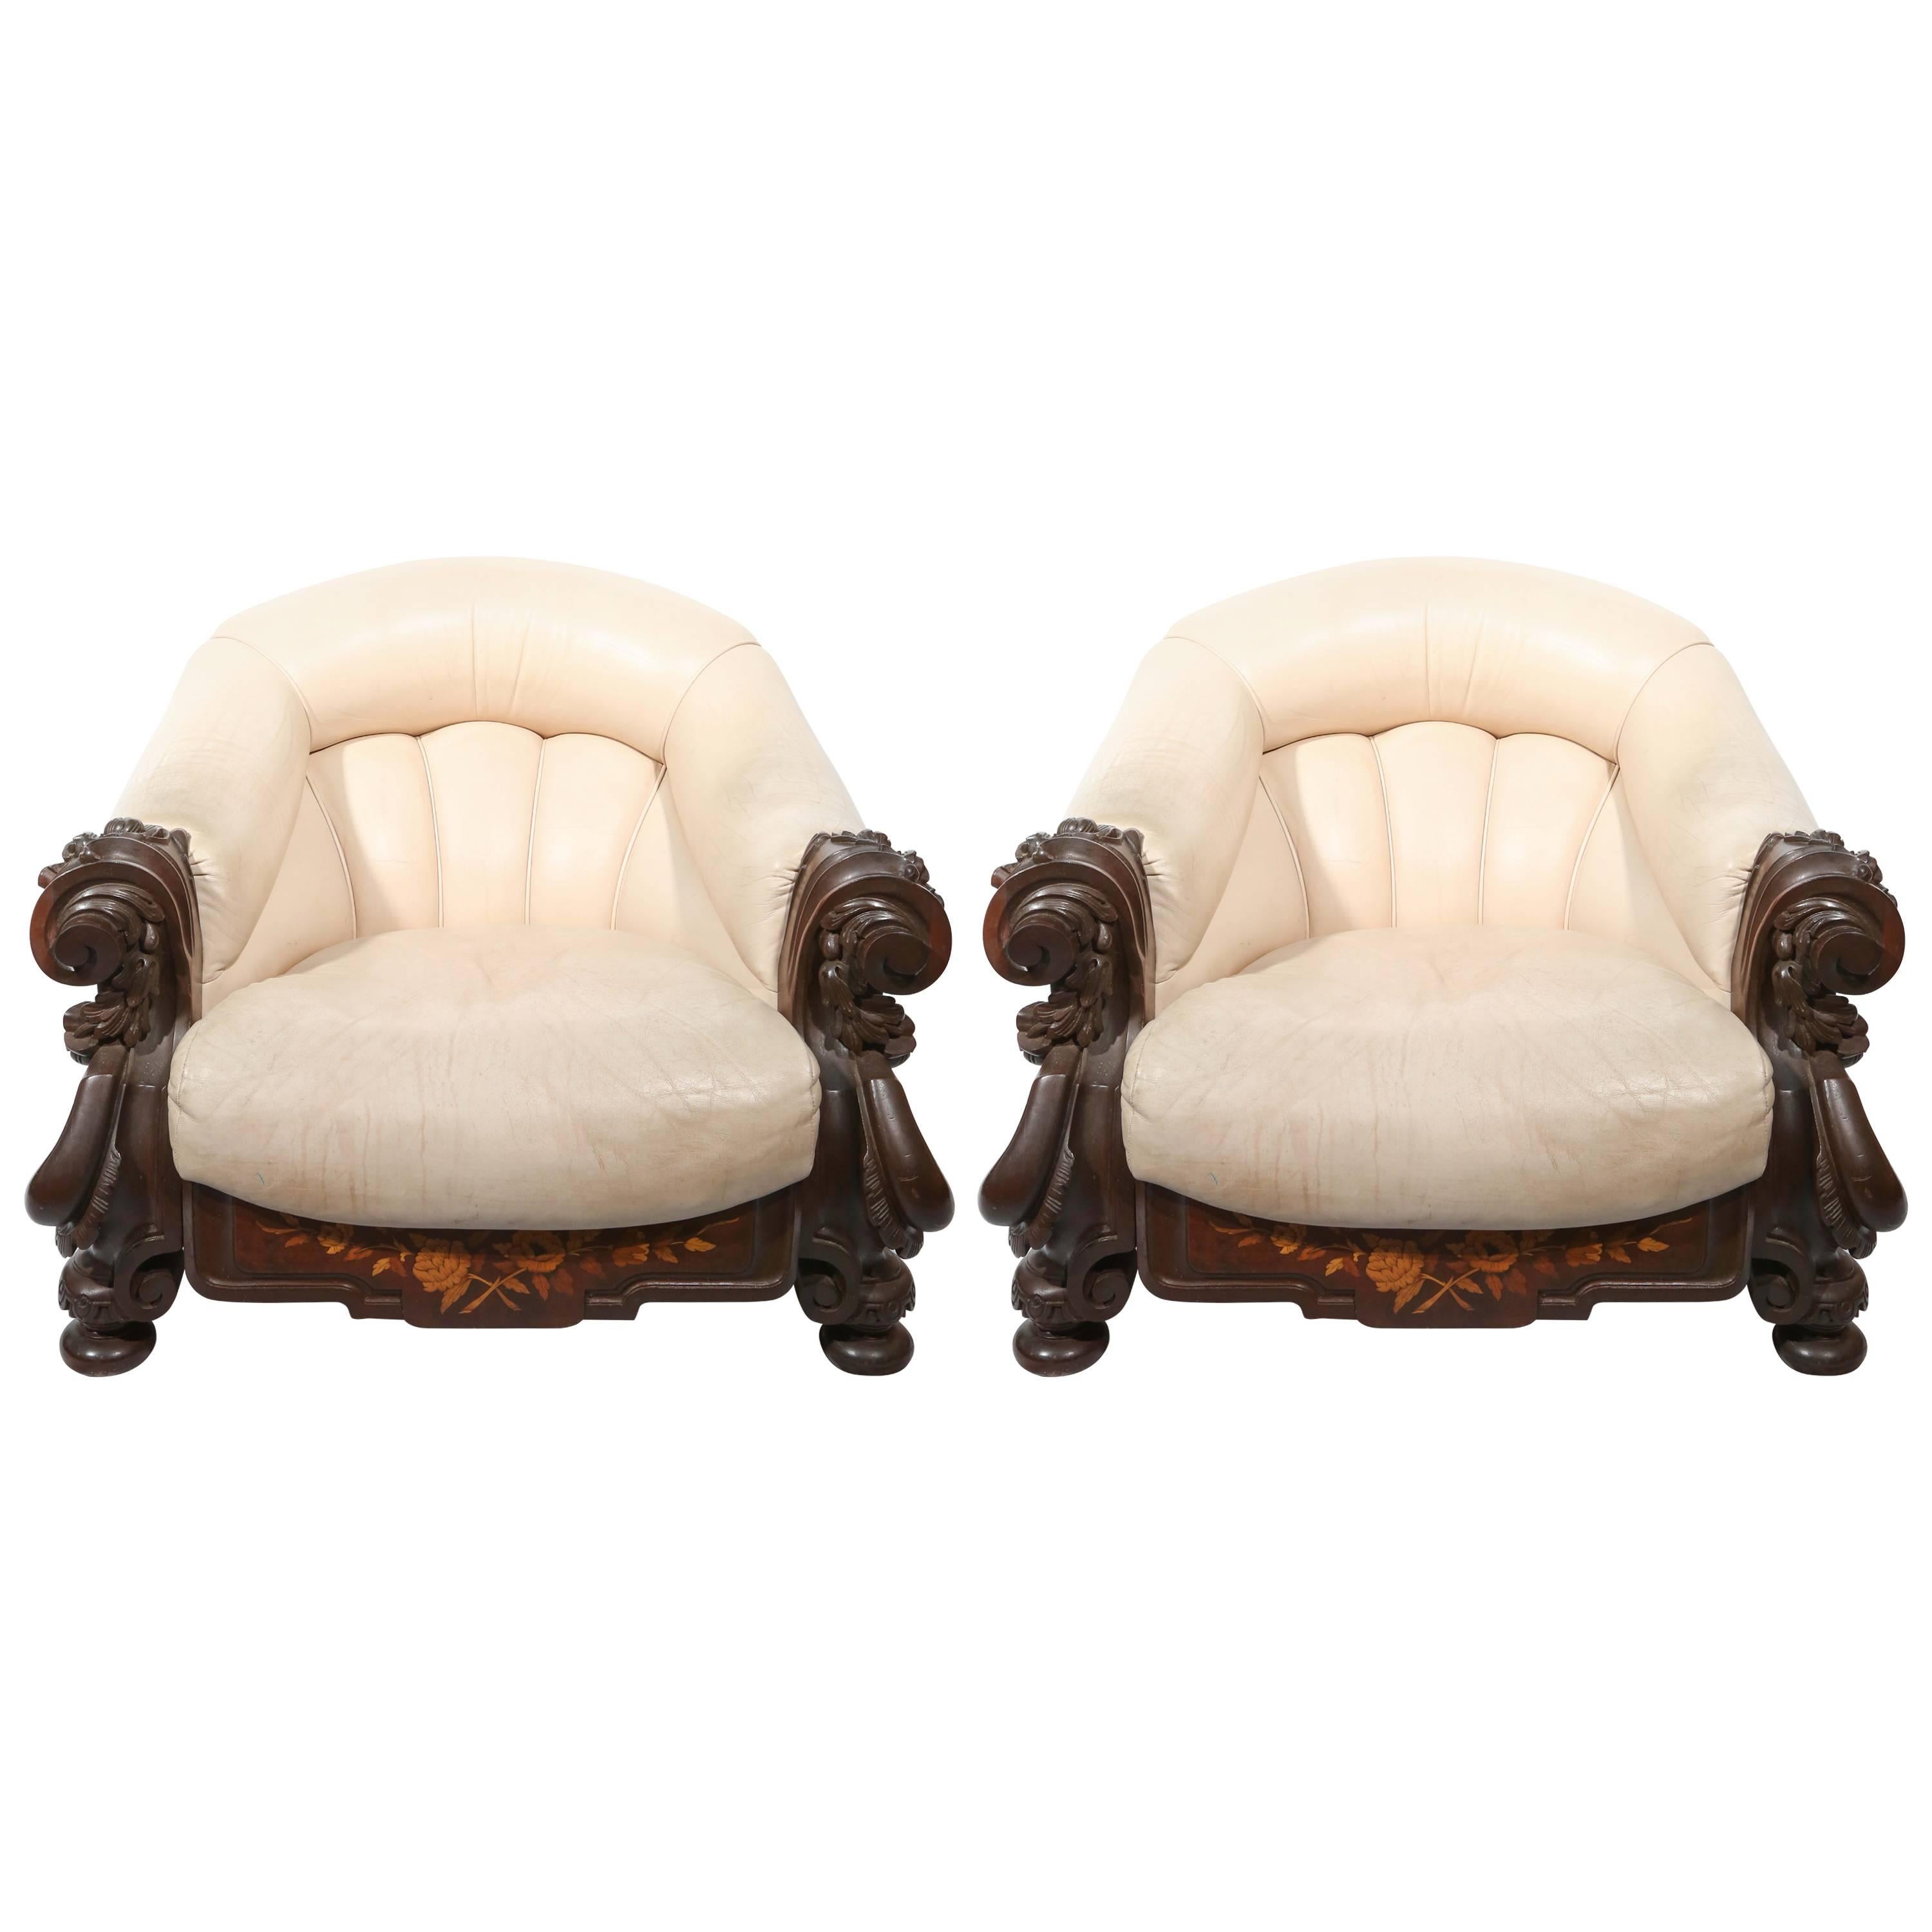 Outstanding Pair of Belle Époque Marquetry and Leather "Gentlemen's" Chairs